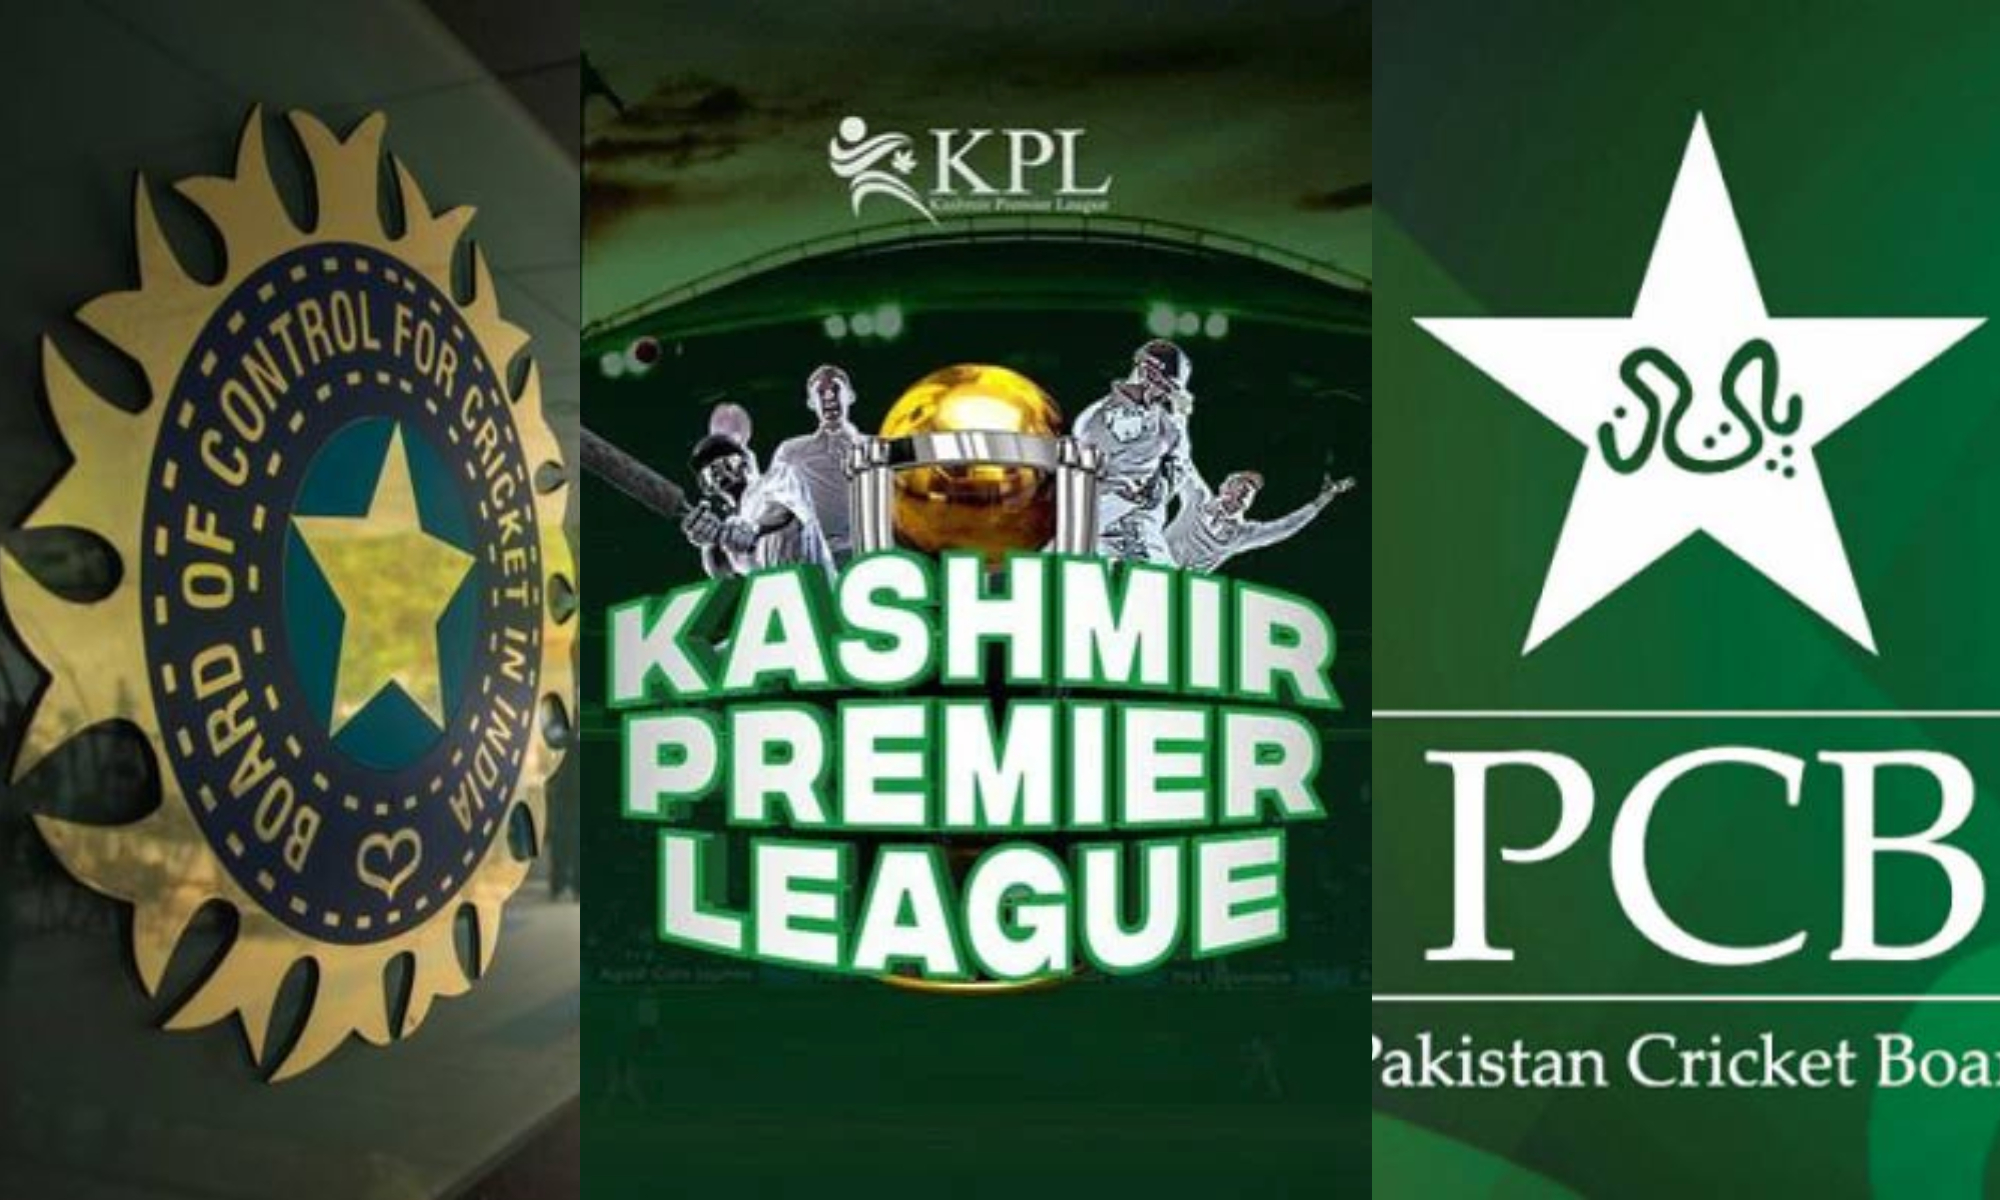 BCCI has made it clear it is unhappy with PCB holding a cricket tournament in POK